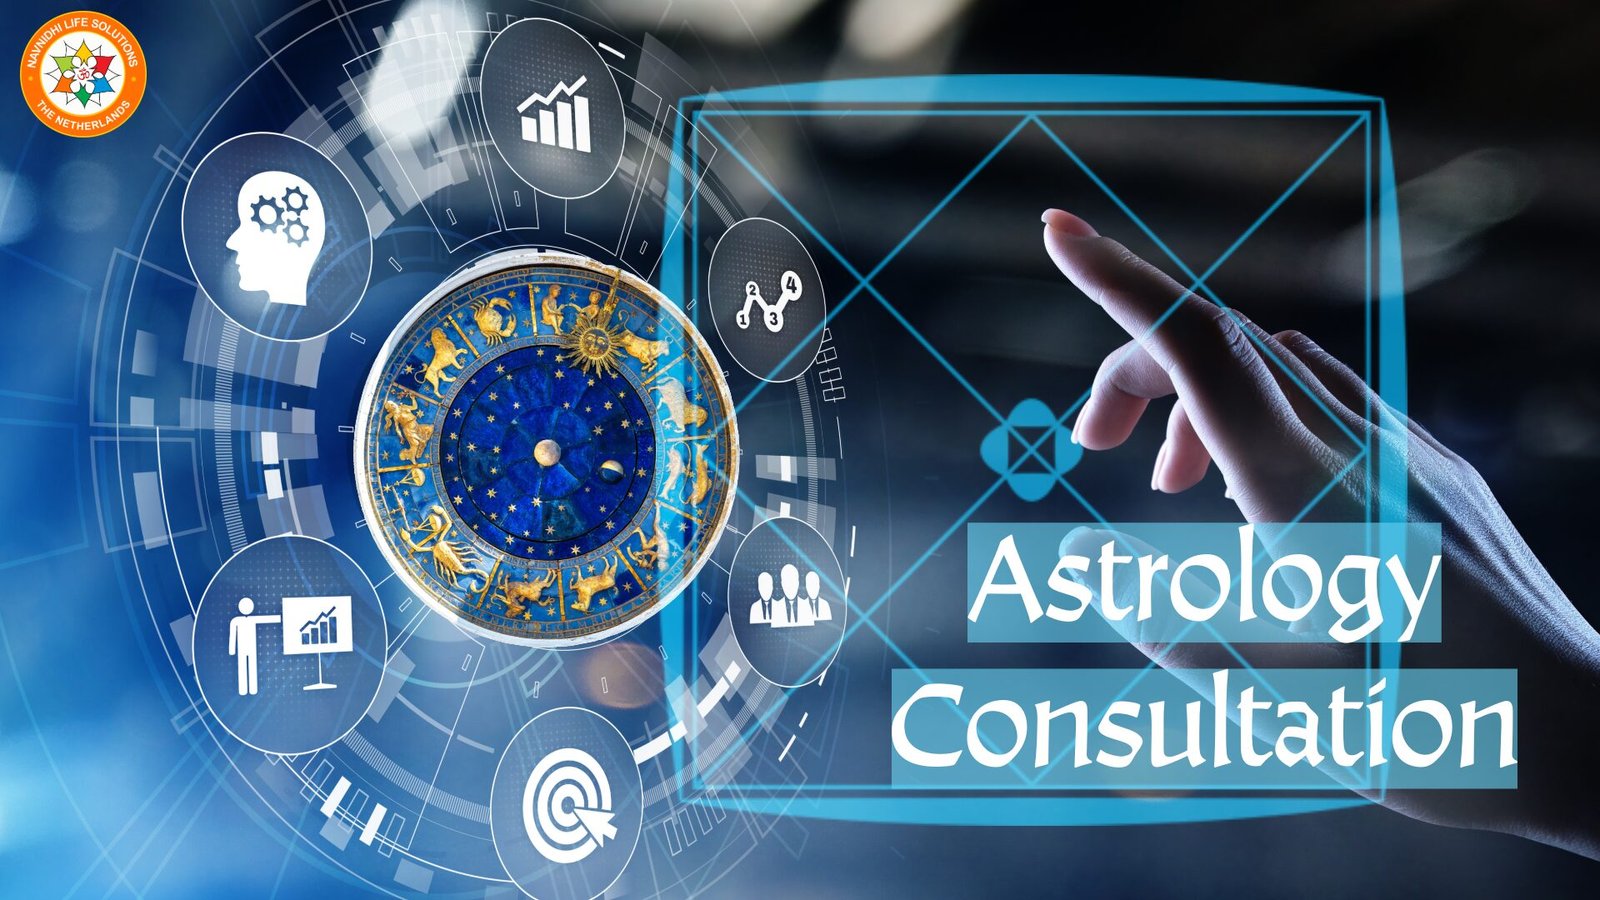 How Astrology Consultation works at the Best astrologer in den haag